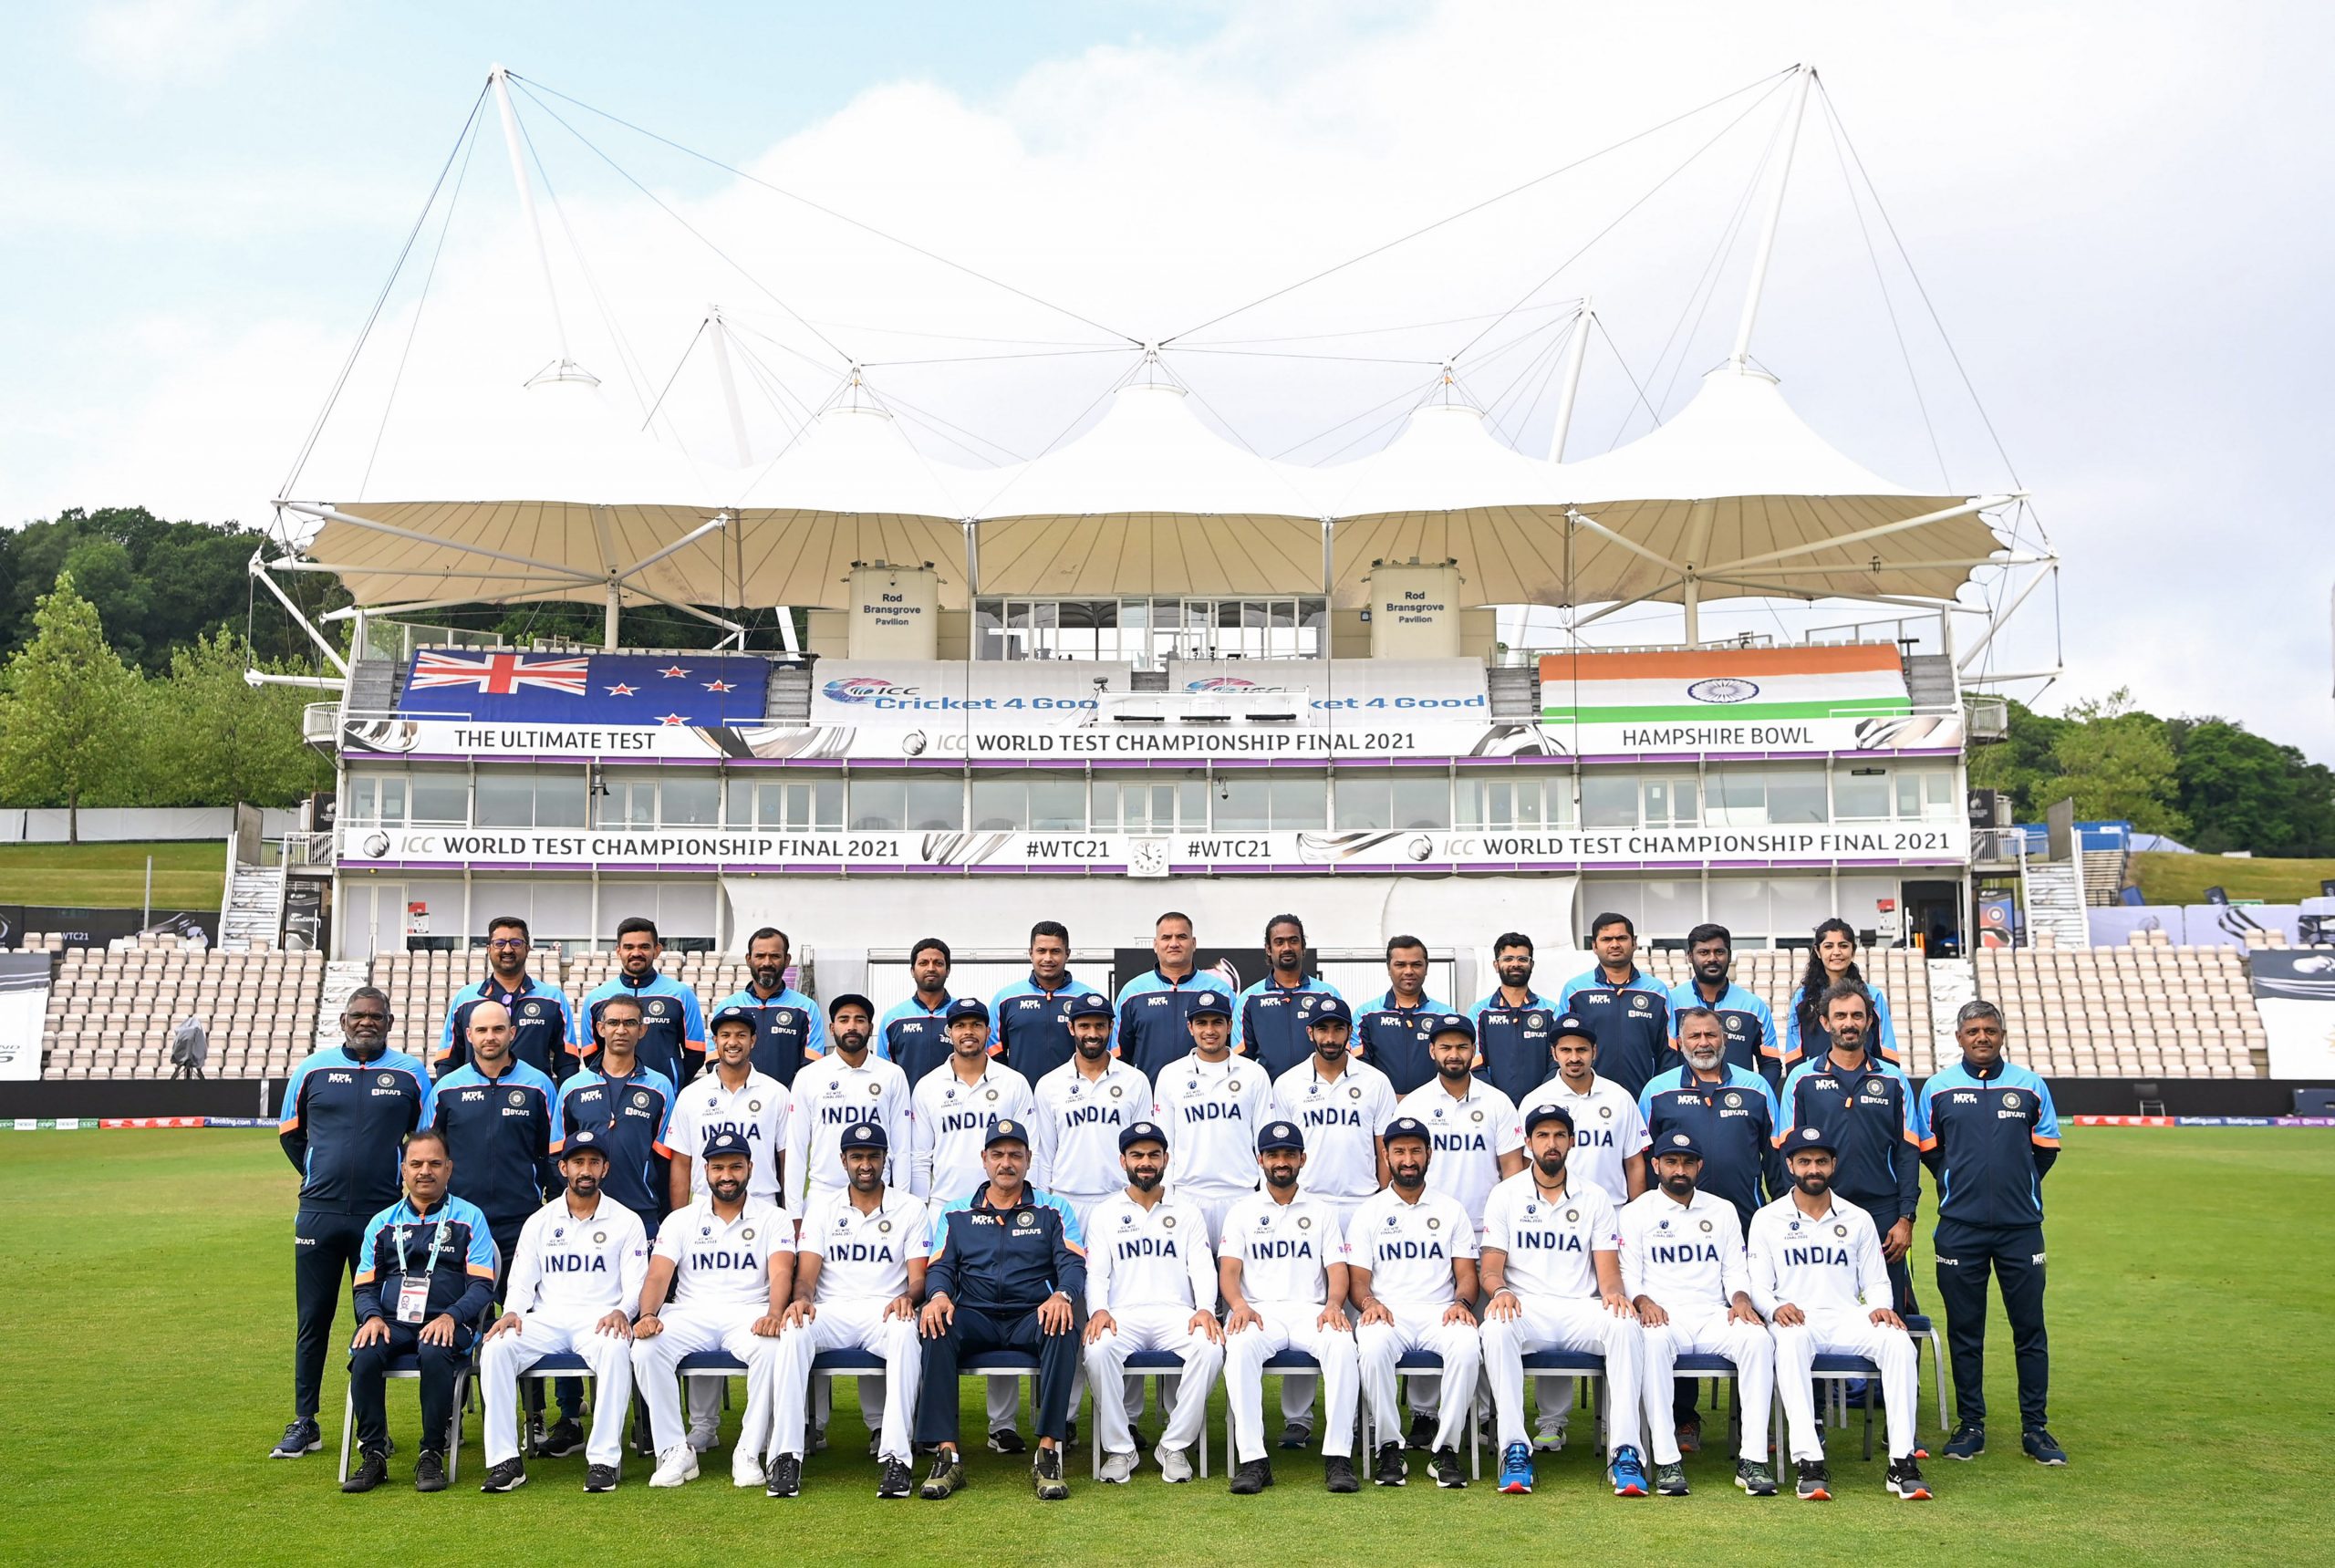 Mapping Team India’s journey to the World Test Championship final